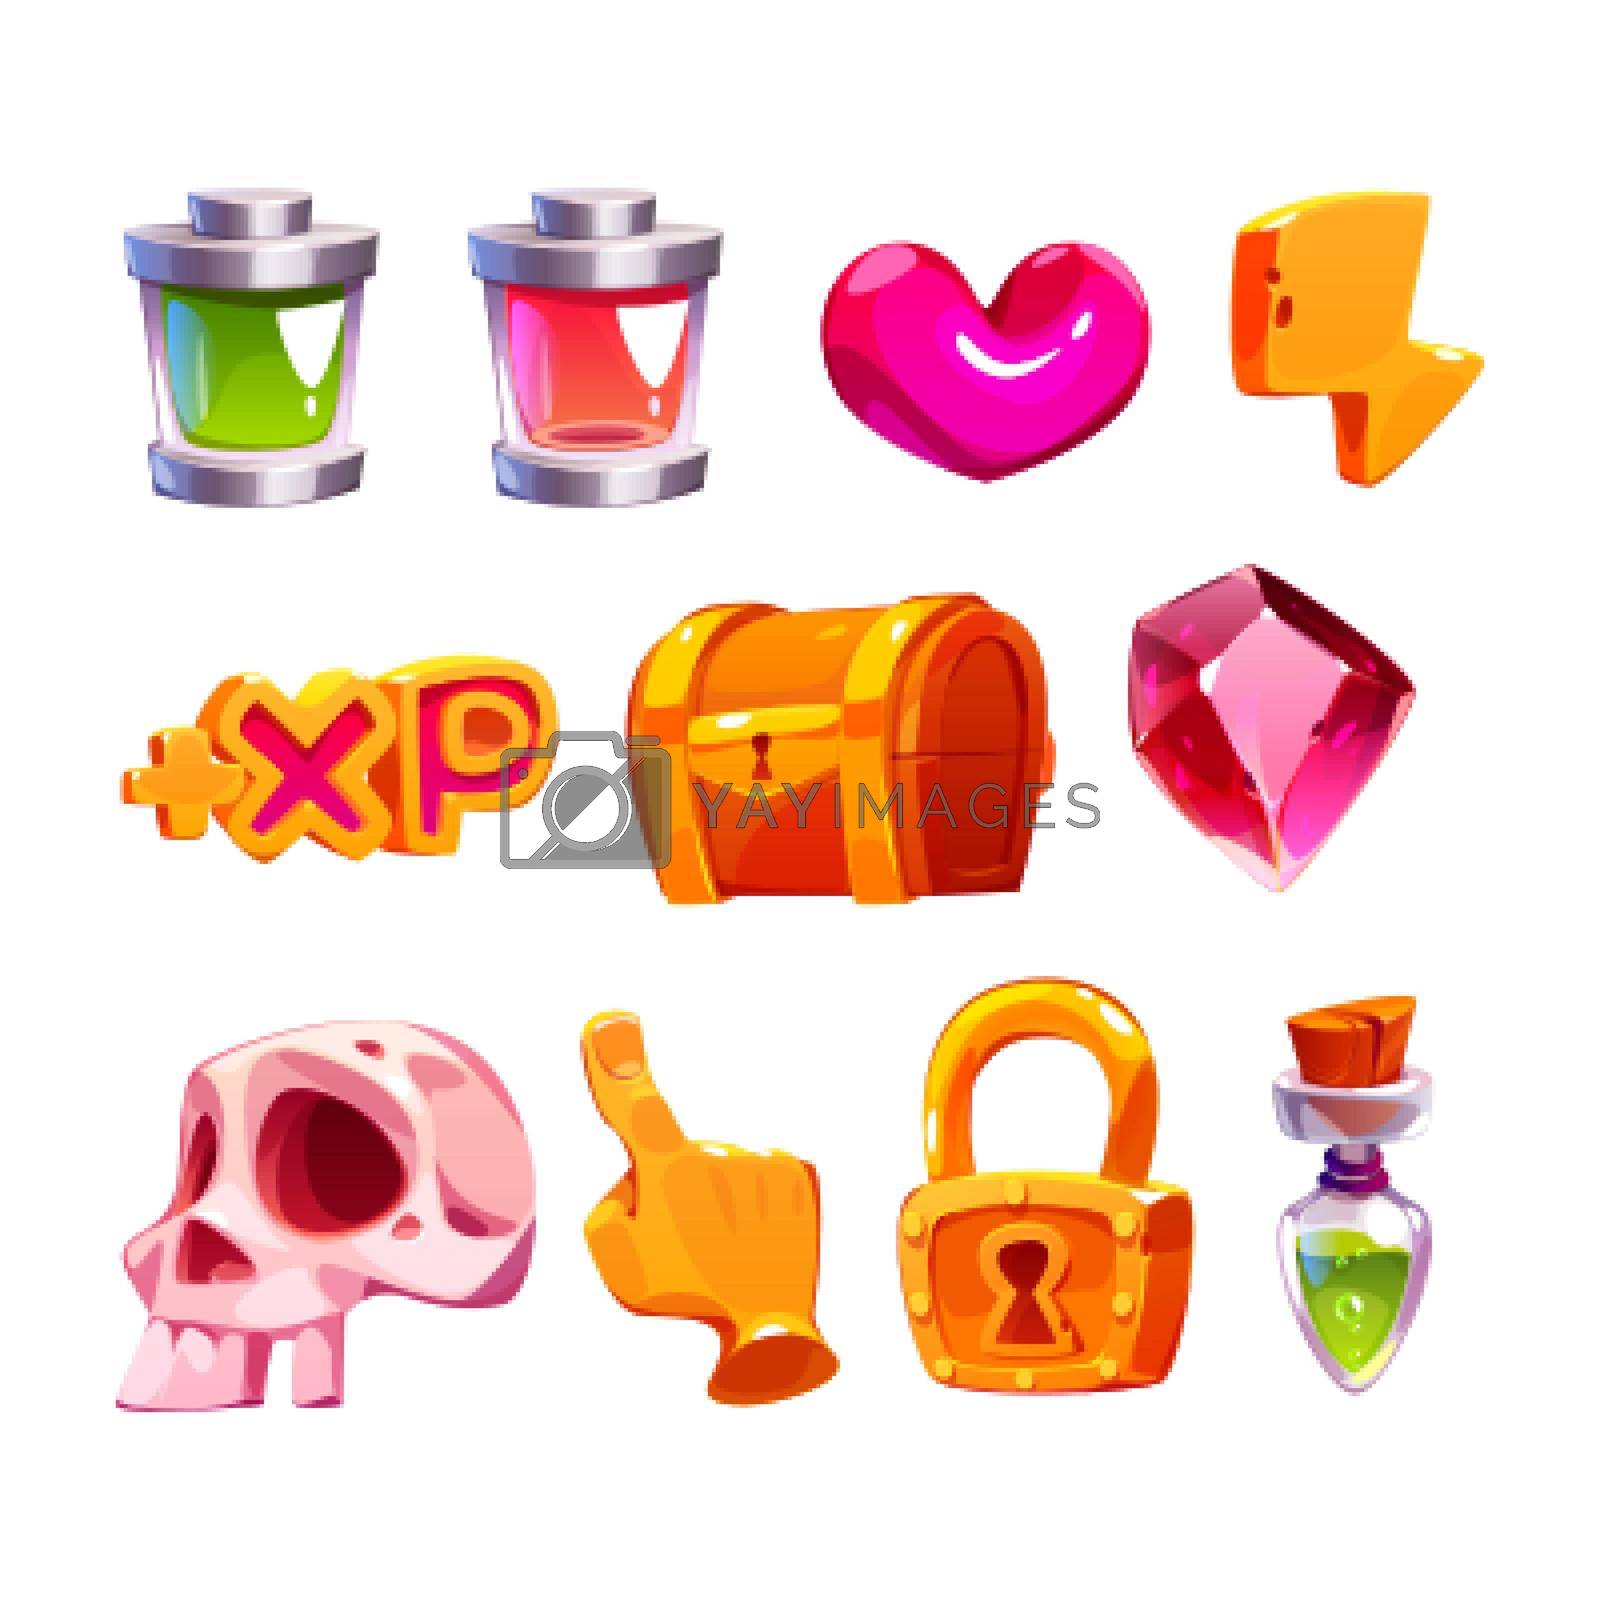 Royalty free image of Game icons with heart, gem, lightning, batteries by vectorart